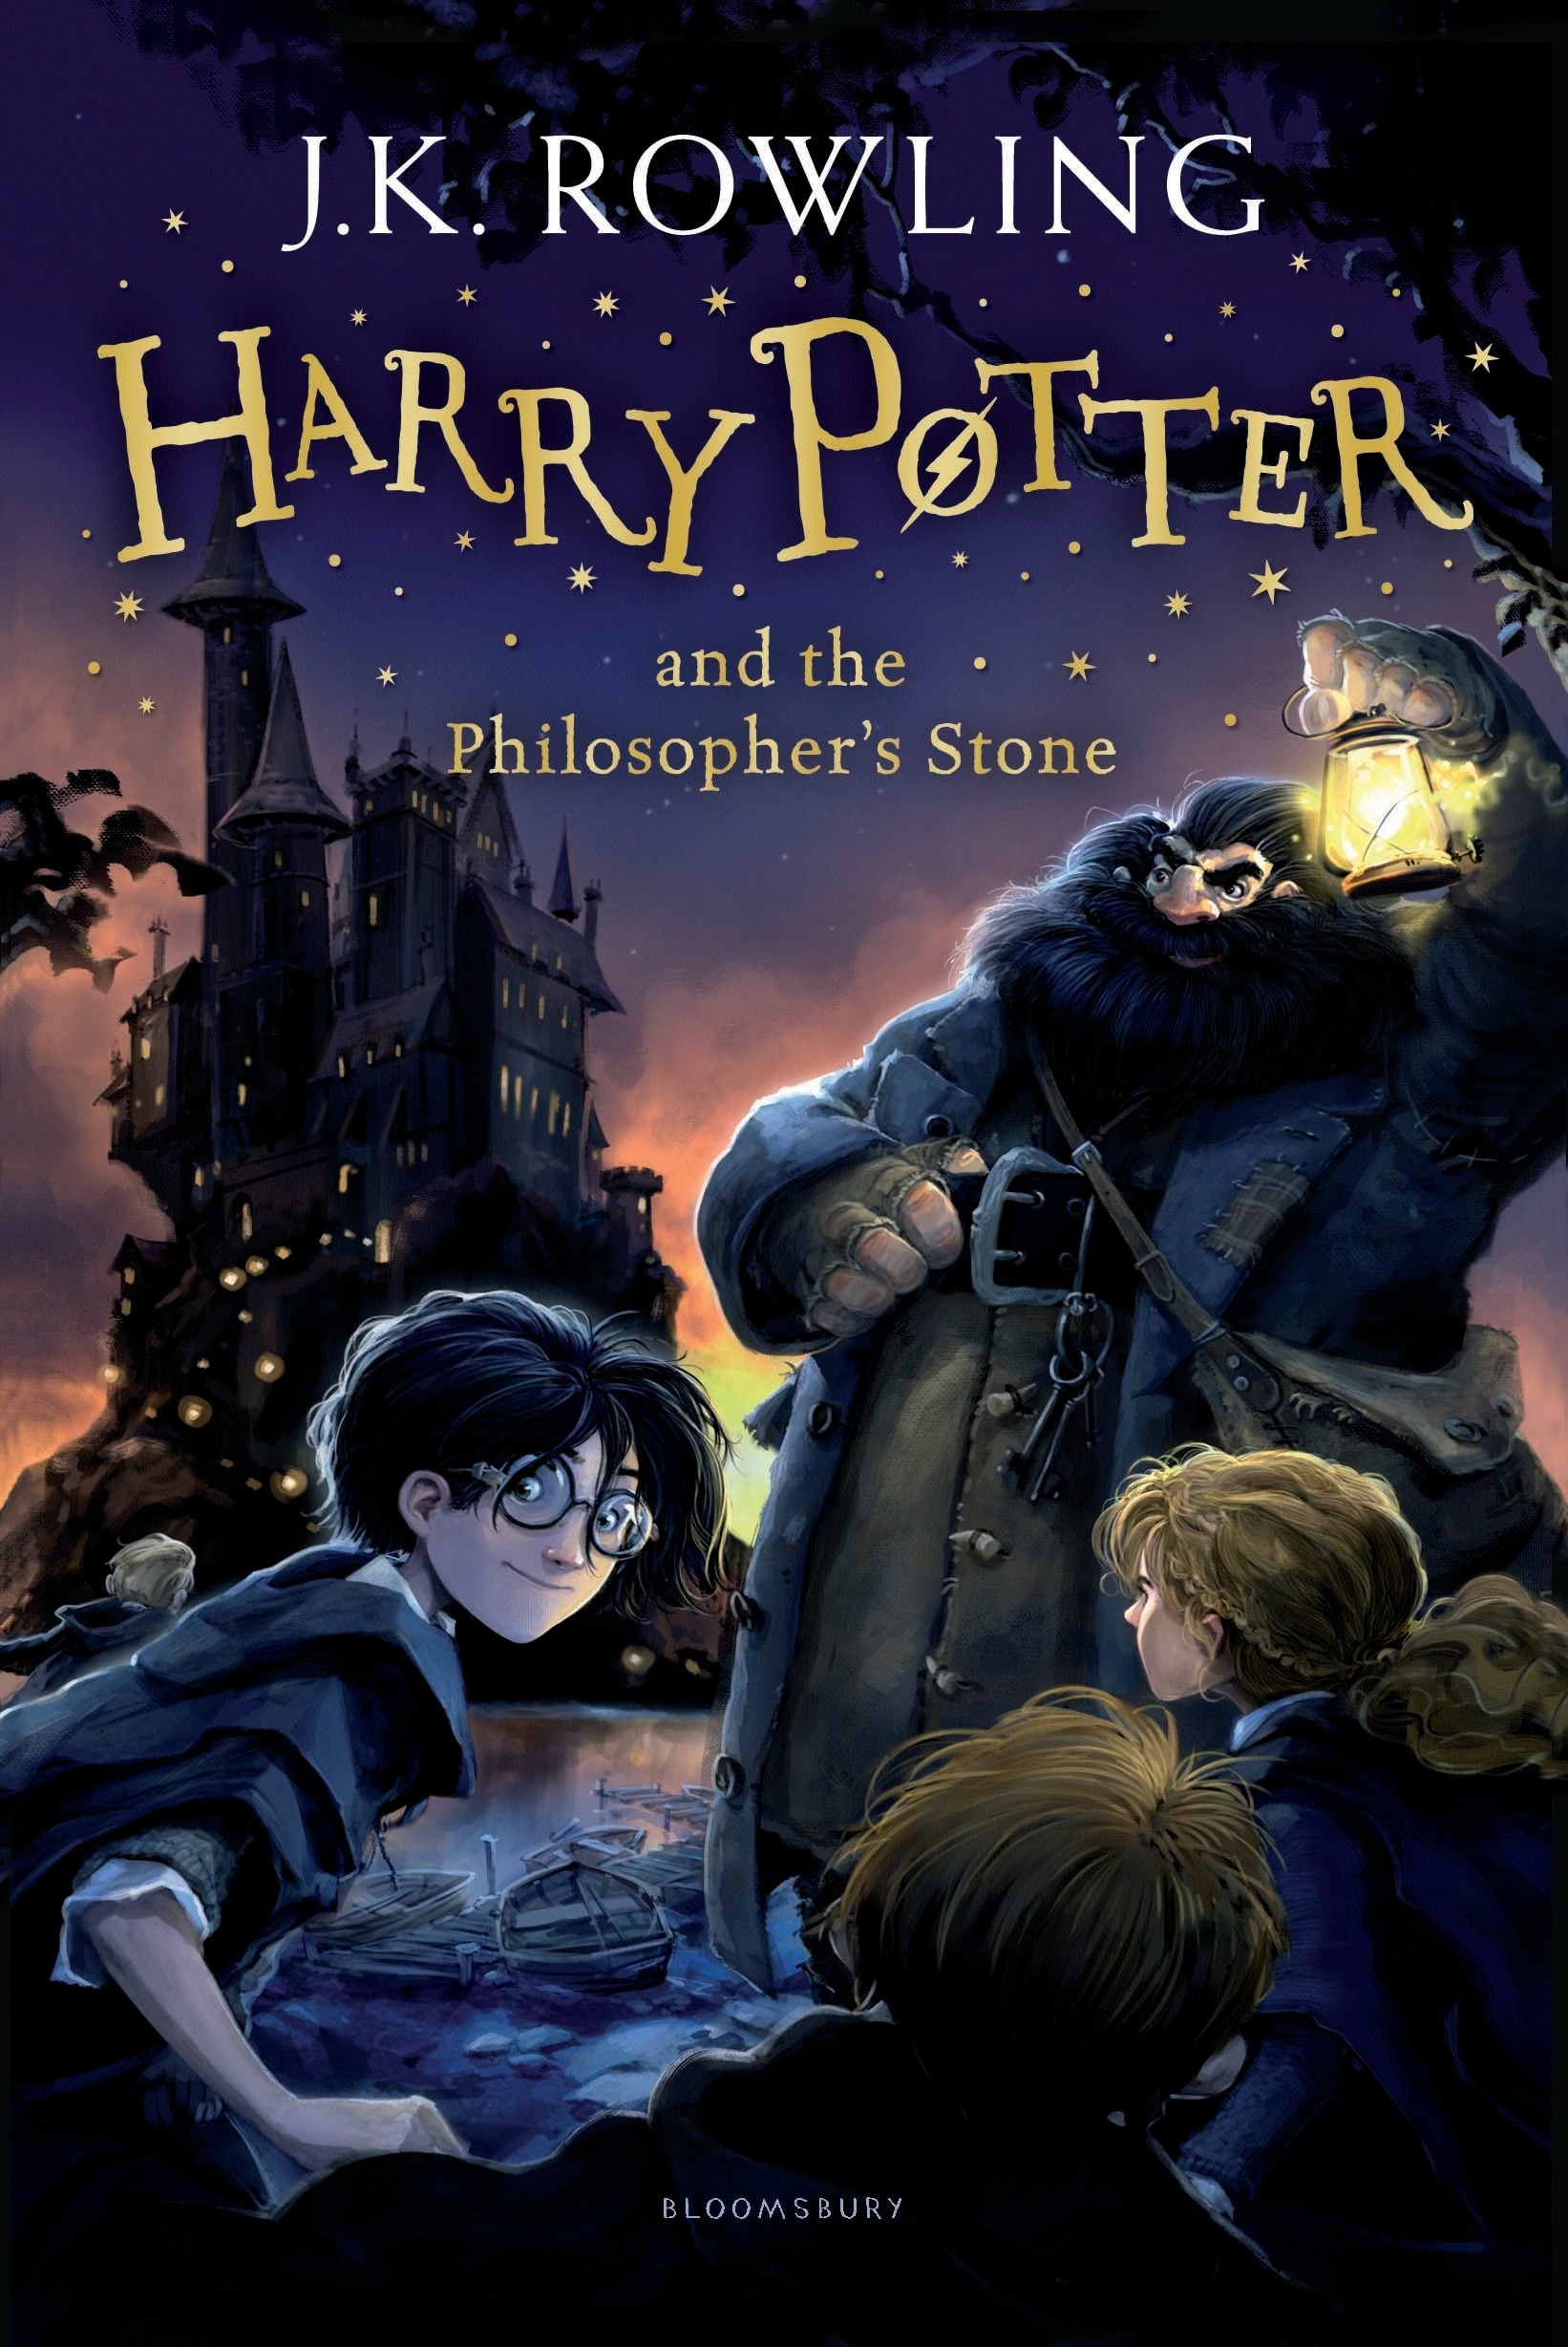 Book “Harry Potter and the Philosopher's Stone” by J.K. Rowling — September 1, 2014